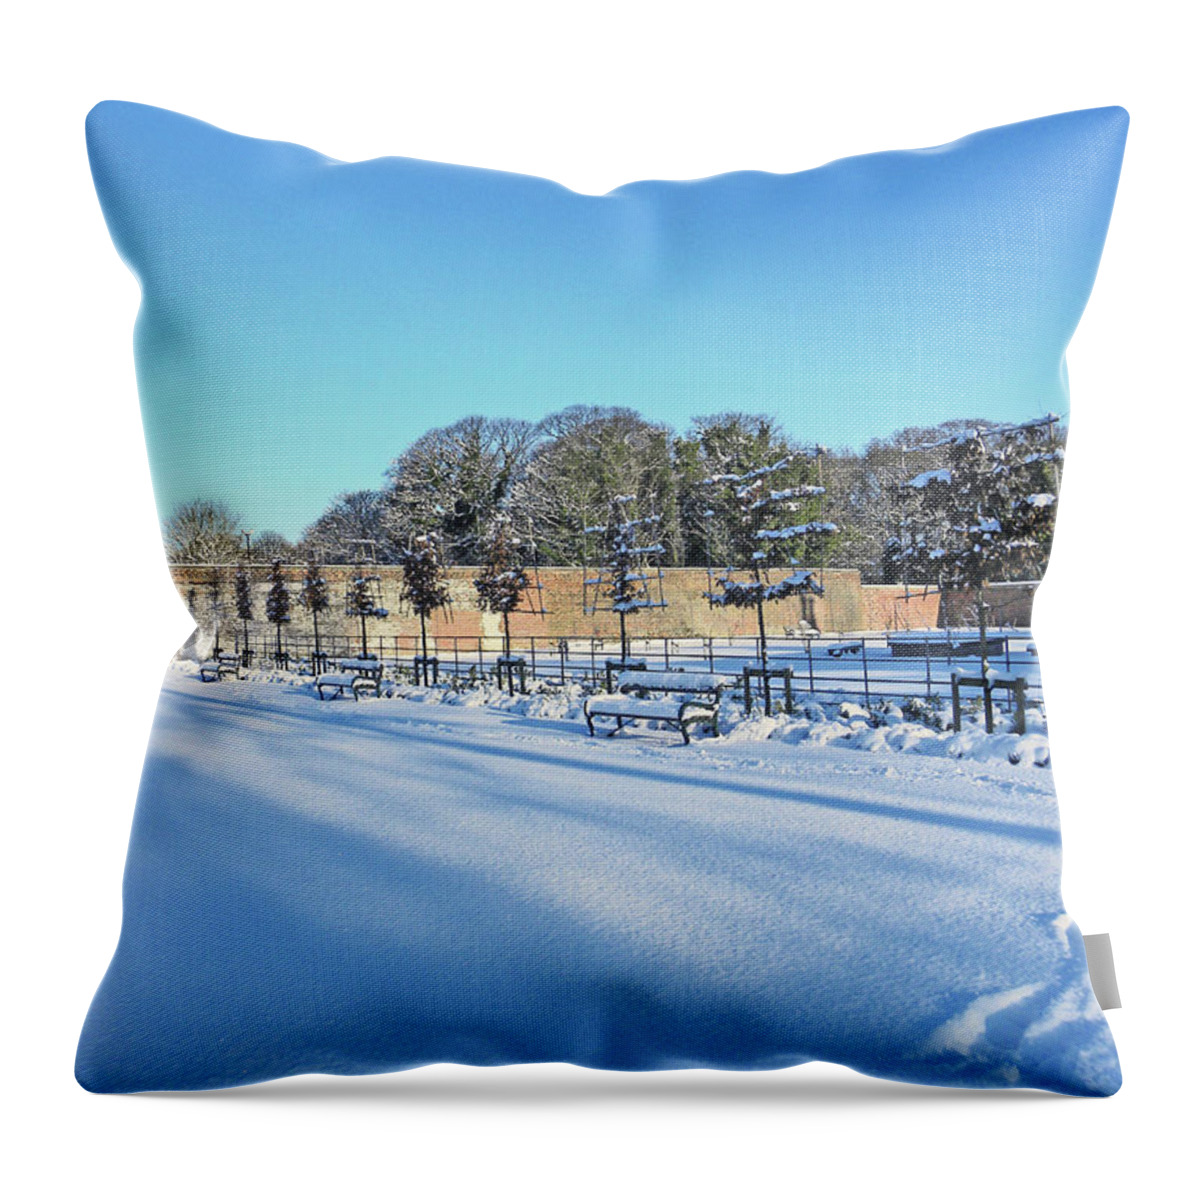 Chorley Throw Pillow featuring the photograph Walled Garden Winter Landscape by Lachlan Main